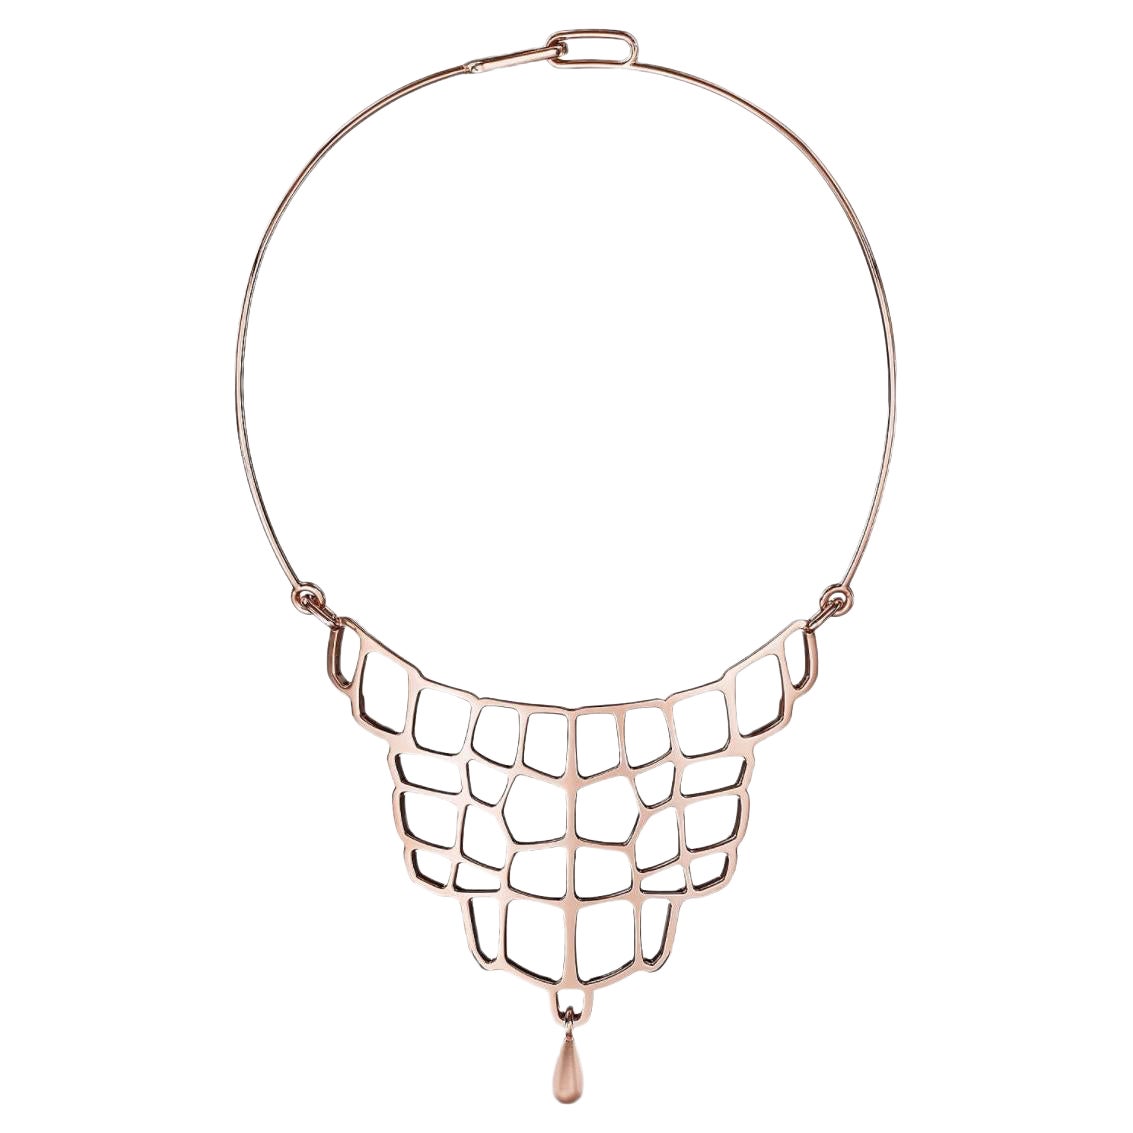 Hermes Niloticus Ombre Necklace, Large Model Necklace